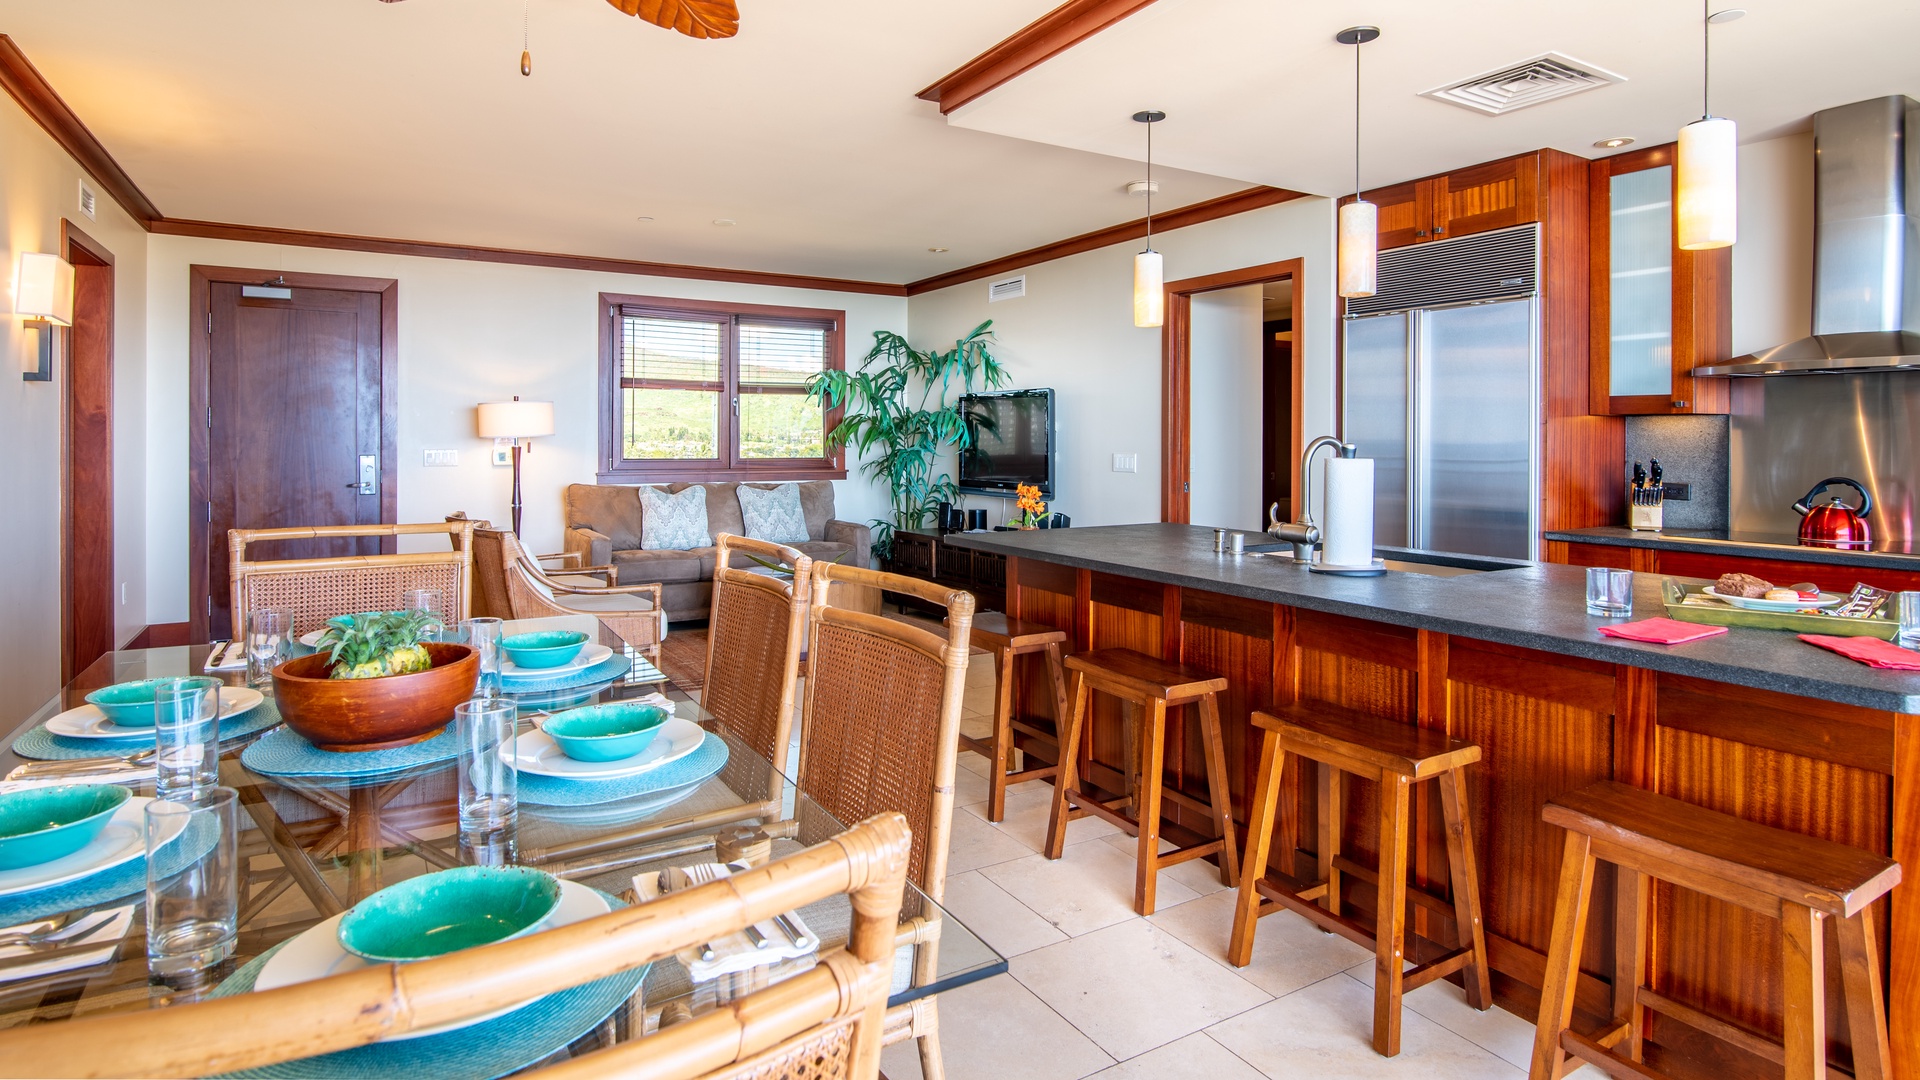 Kapolei Vacation Rentals, Ko Olina Beach Villas B901 - Another view of the kitchen, dining and living area.